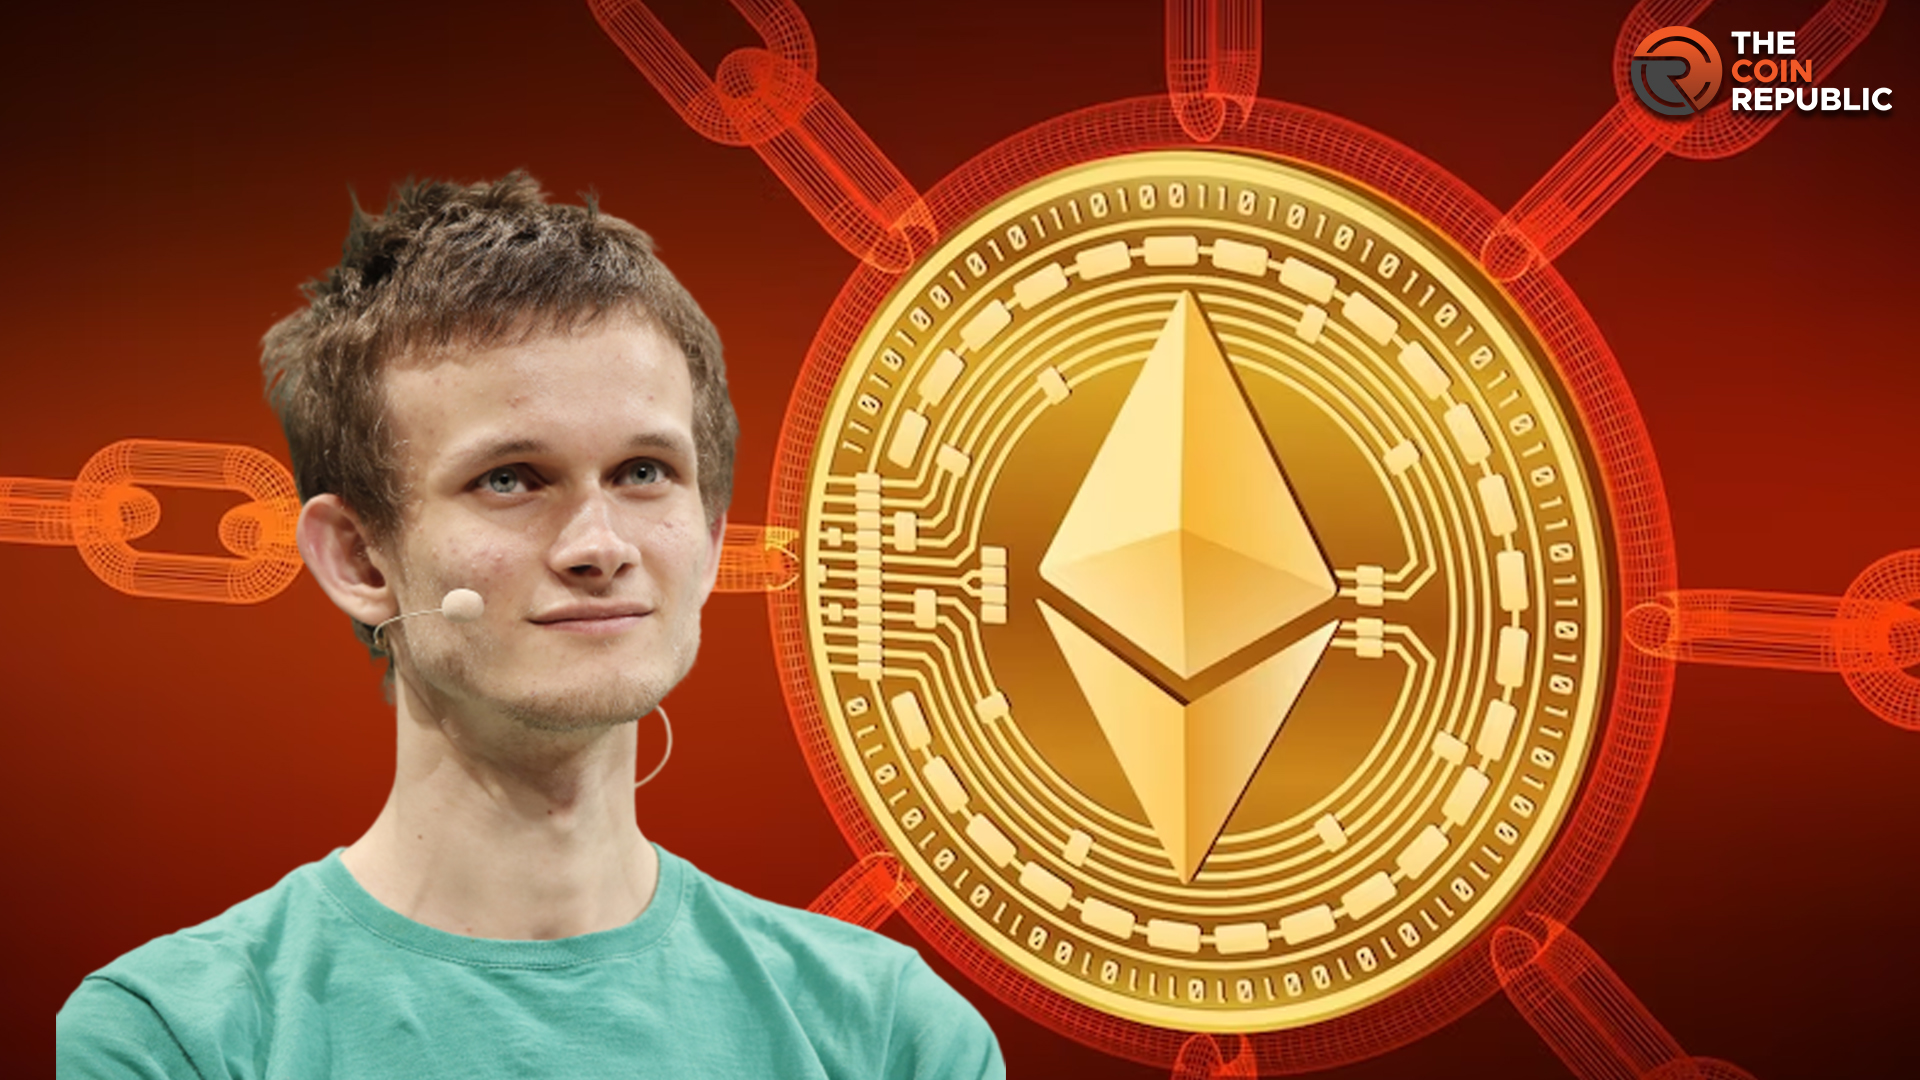 Overloading Ethereum Consensus Could Have Consequences – Buterin